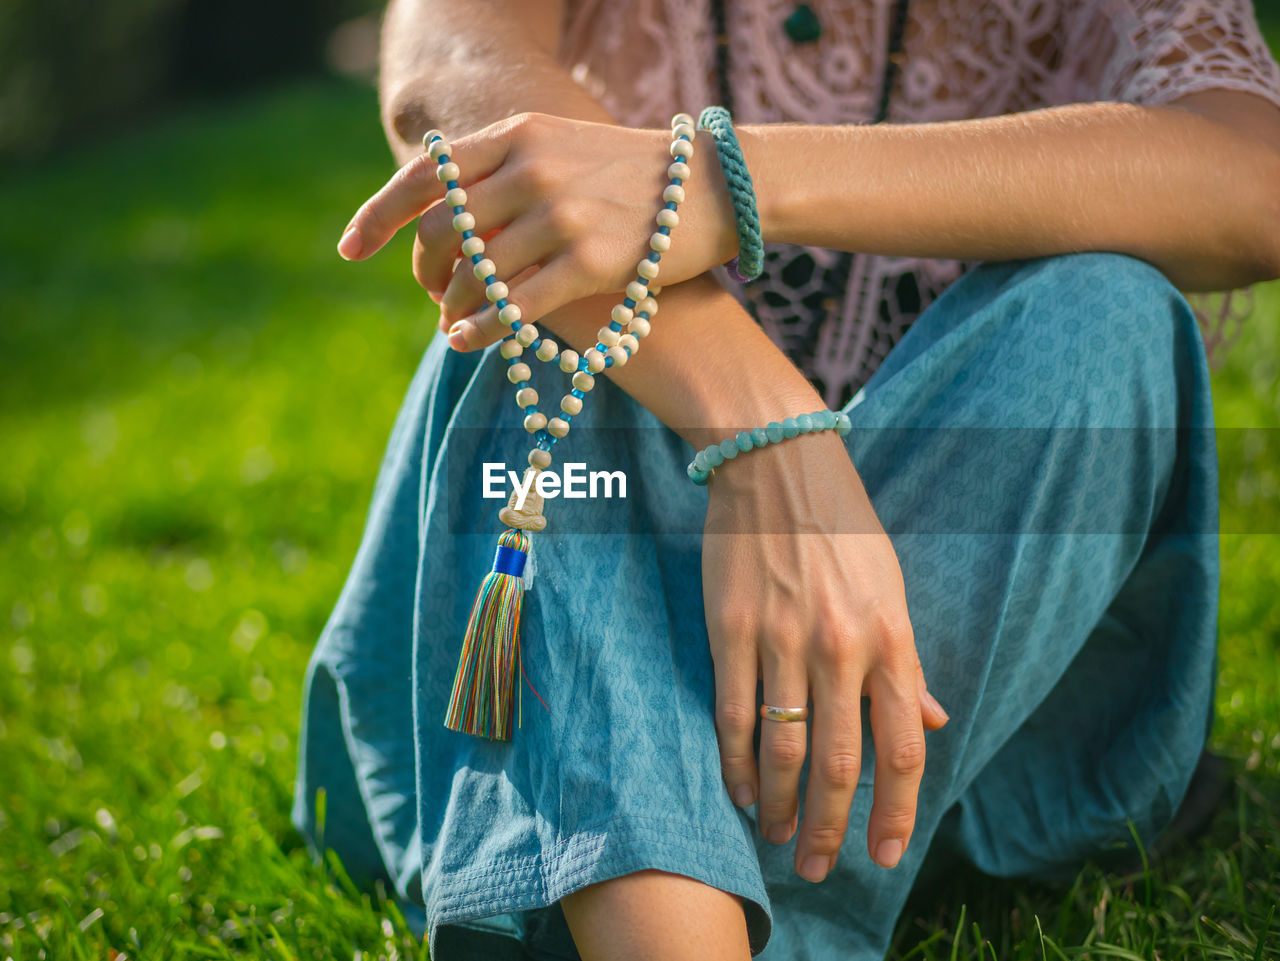 Midsection of woman with bead jewelry sitting on grassy field